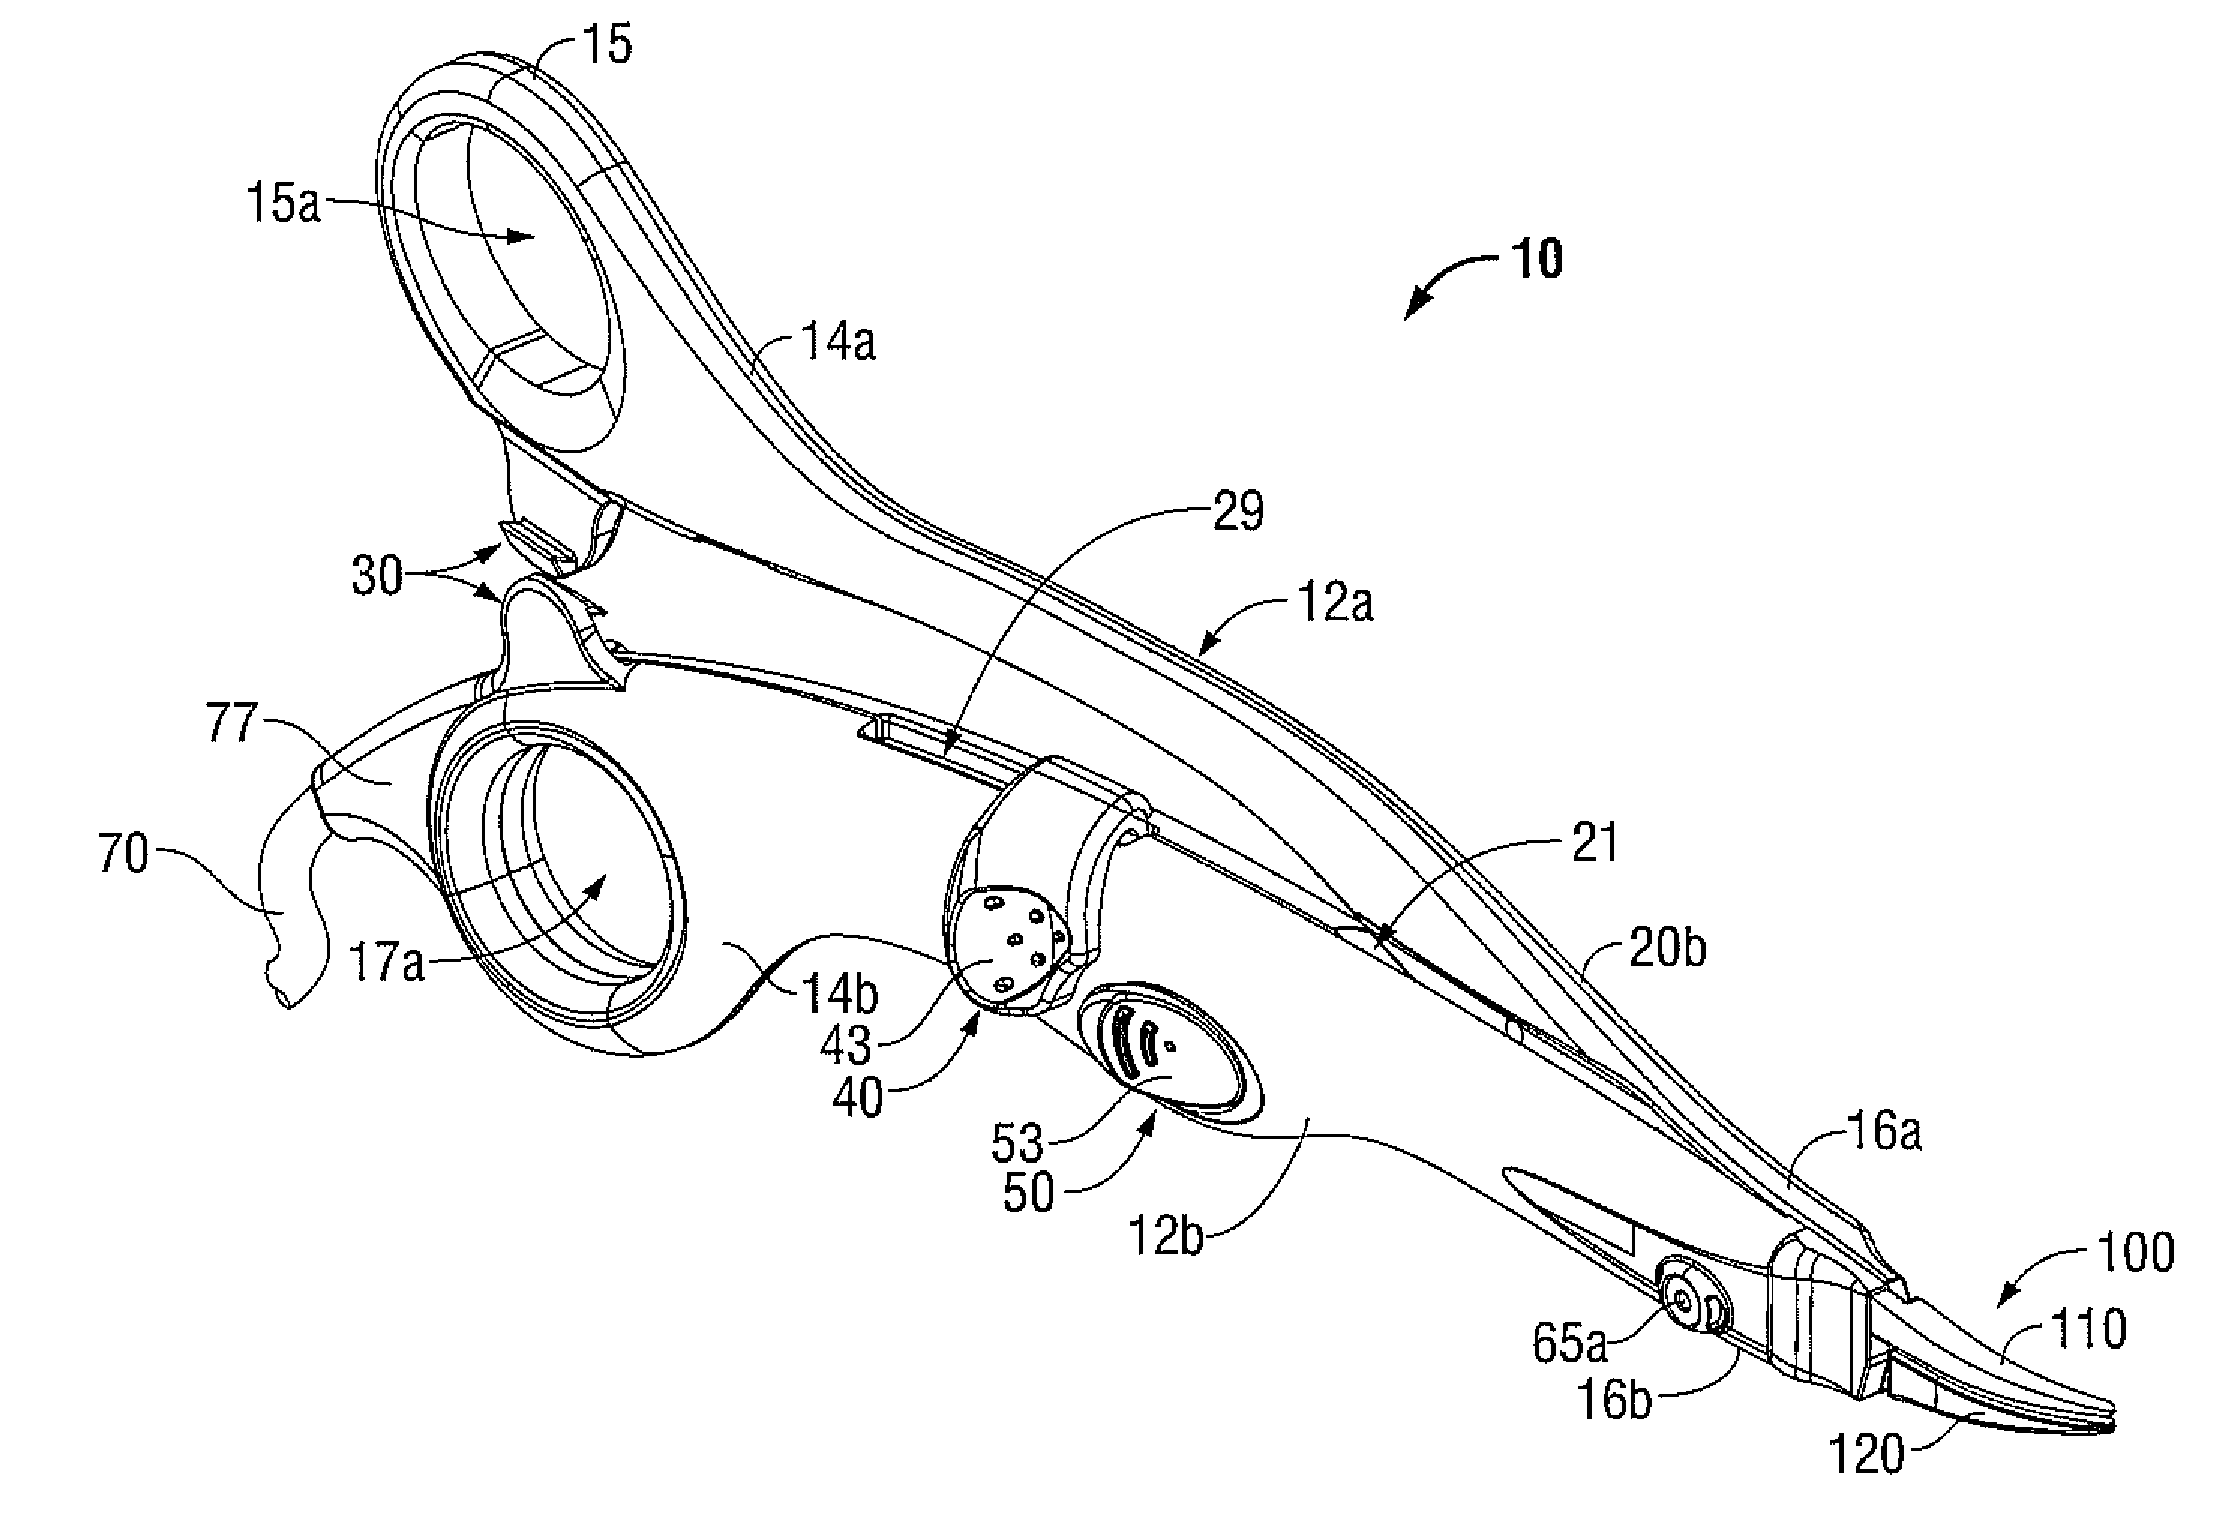 Open vessel sealing instrument with pivot assembly